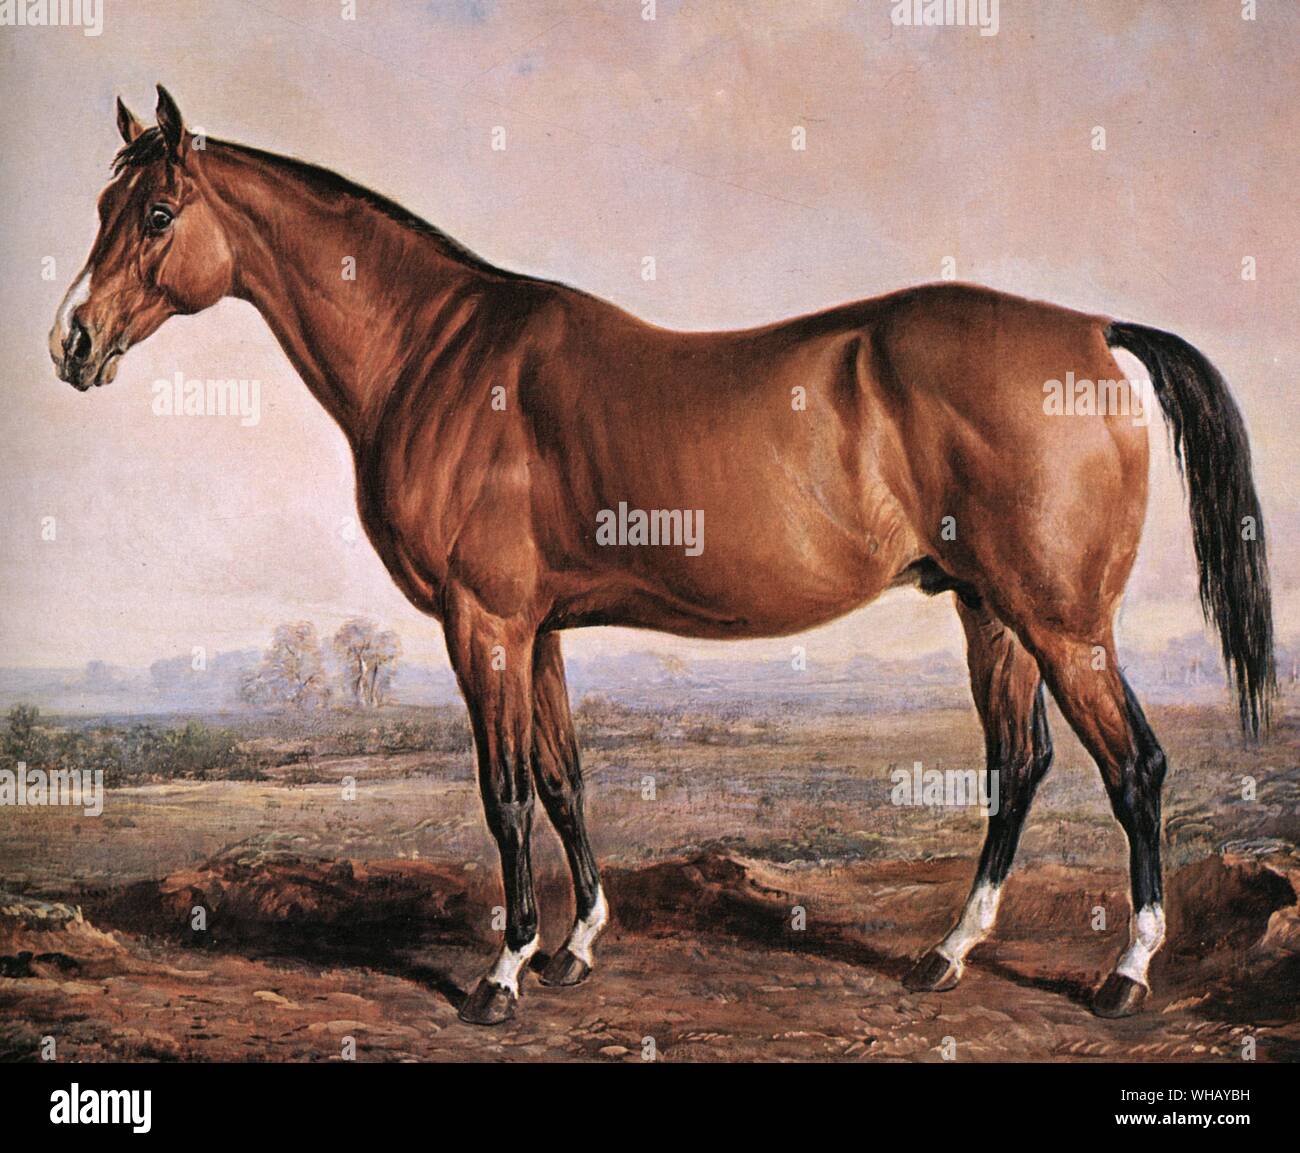 The famous race horse, Lexington, was born in 1850, stood 15 hands (63 inches), 3 inches high, and on April 2, 1855, set a record at the Metaire Course in New Orleans by running 4 miles in 7 minutes, 19 3/4 seconds.. He was the best horse bred in America in the 19th century. Like Man O' War 67 years later, he represented an exceptionally long-established American male line, although there was much recently-imported blood close up in his pedigree. He had limitless stamina and courage, and also the pulverizing speed which enabled him to distance his opponents in many het-races. He became one of Stock Photo